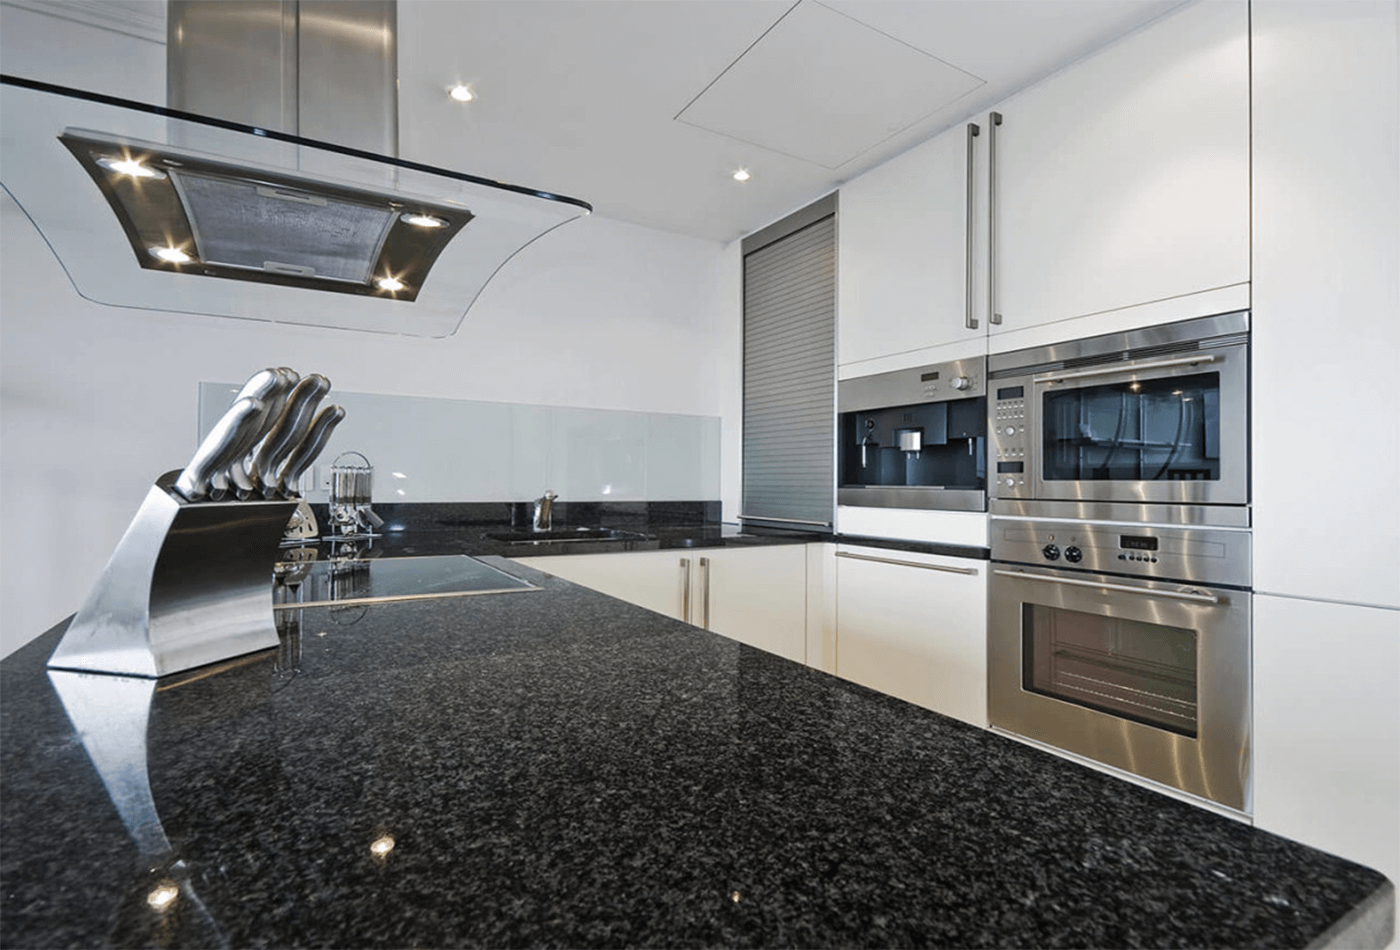 Why Should We Choose Black Impala Granite for Your Kitchen